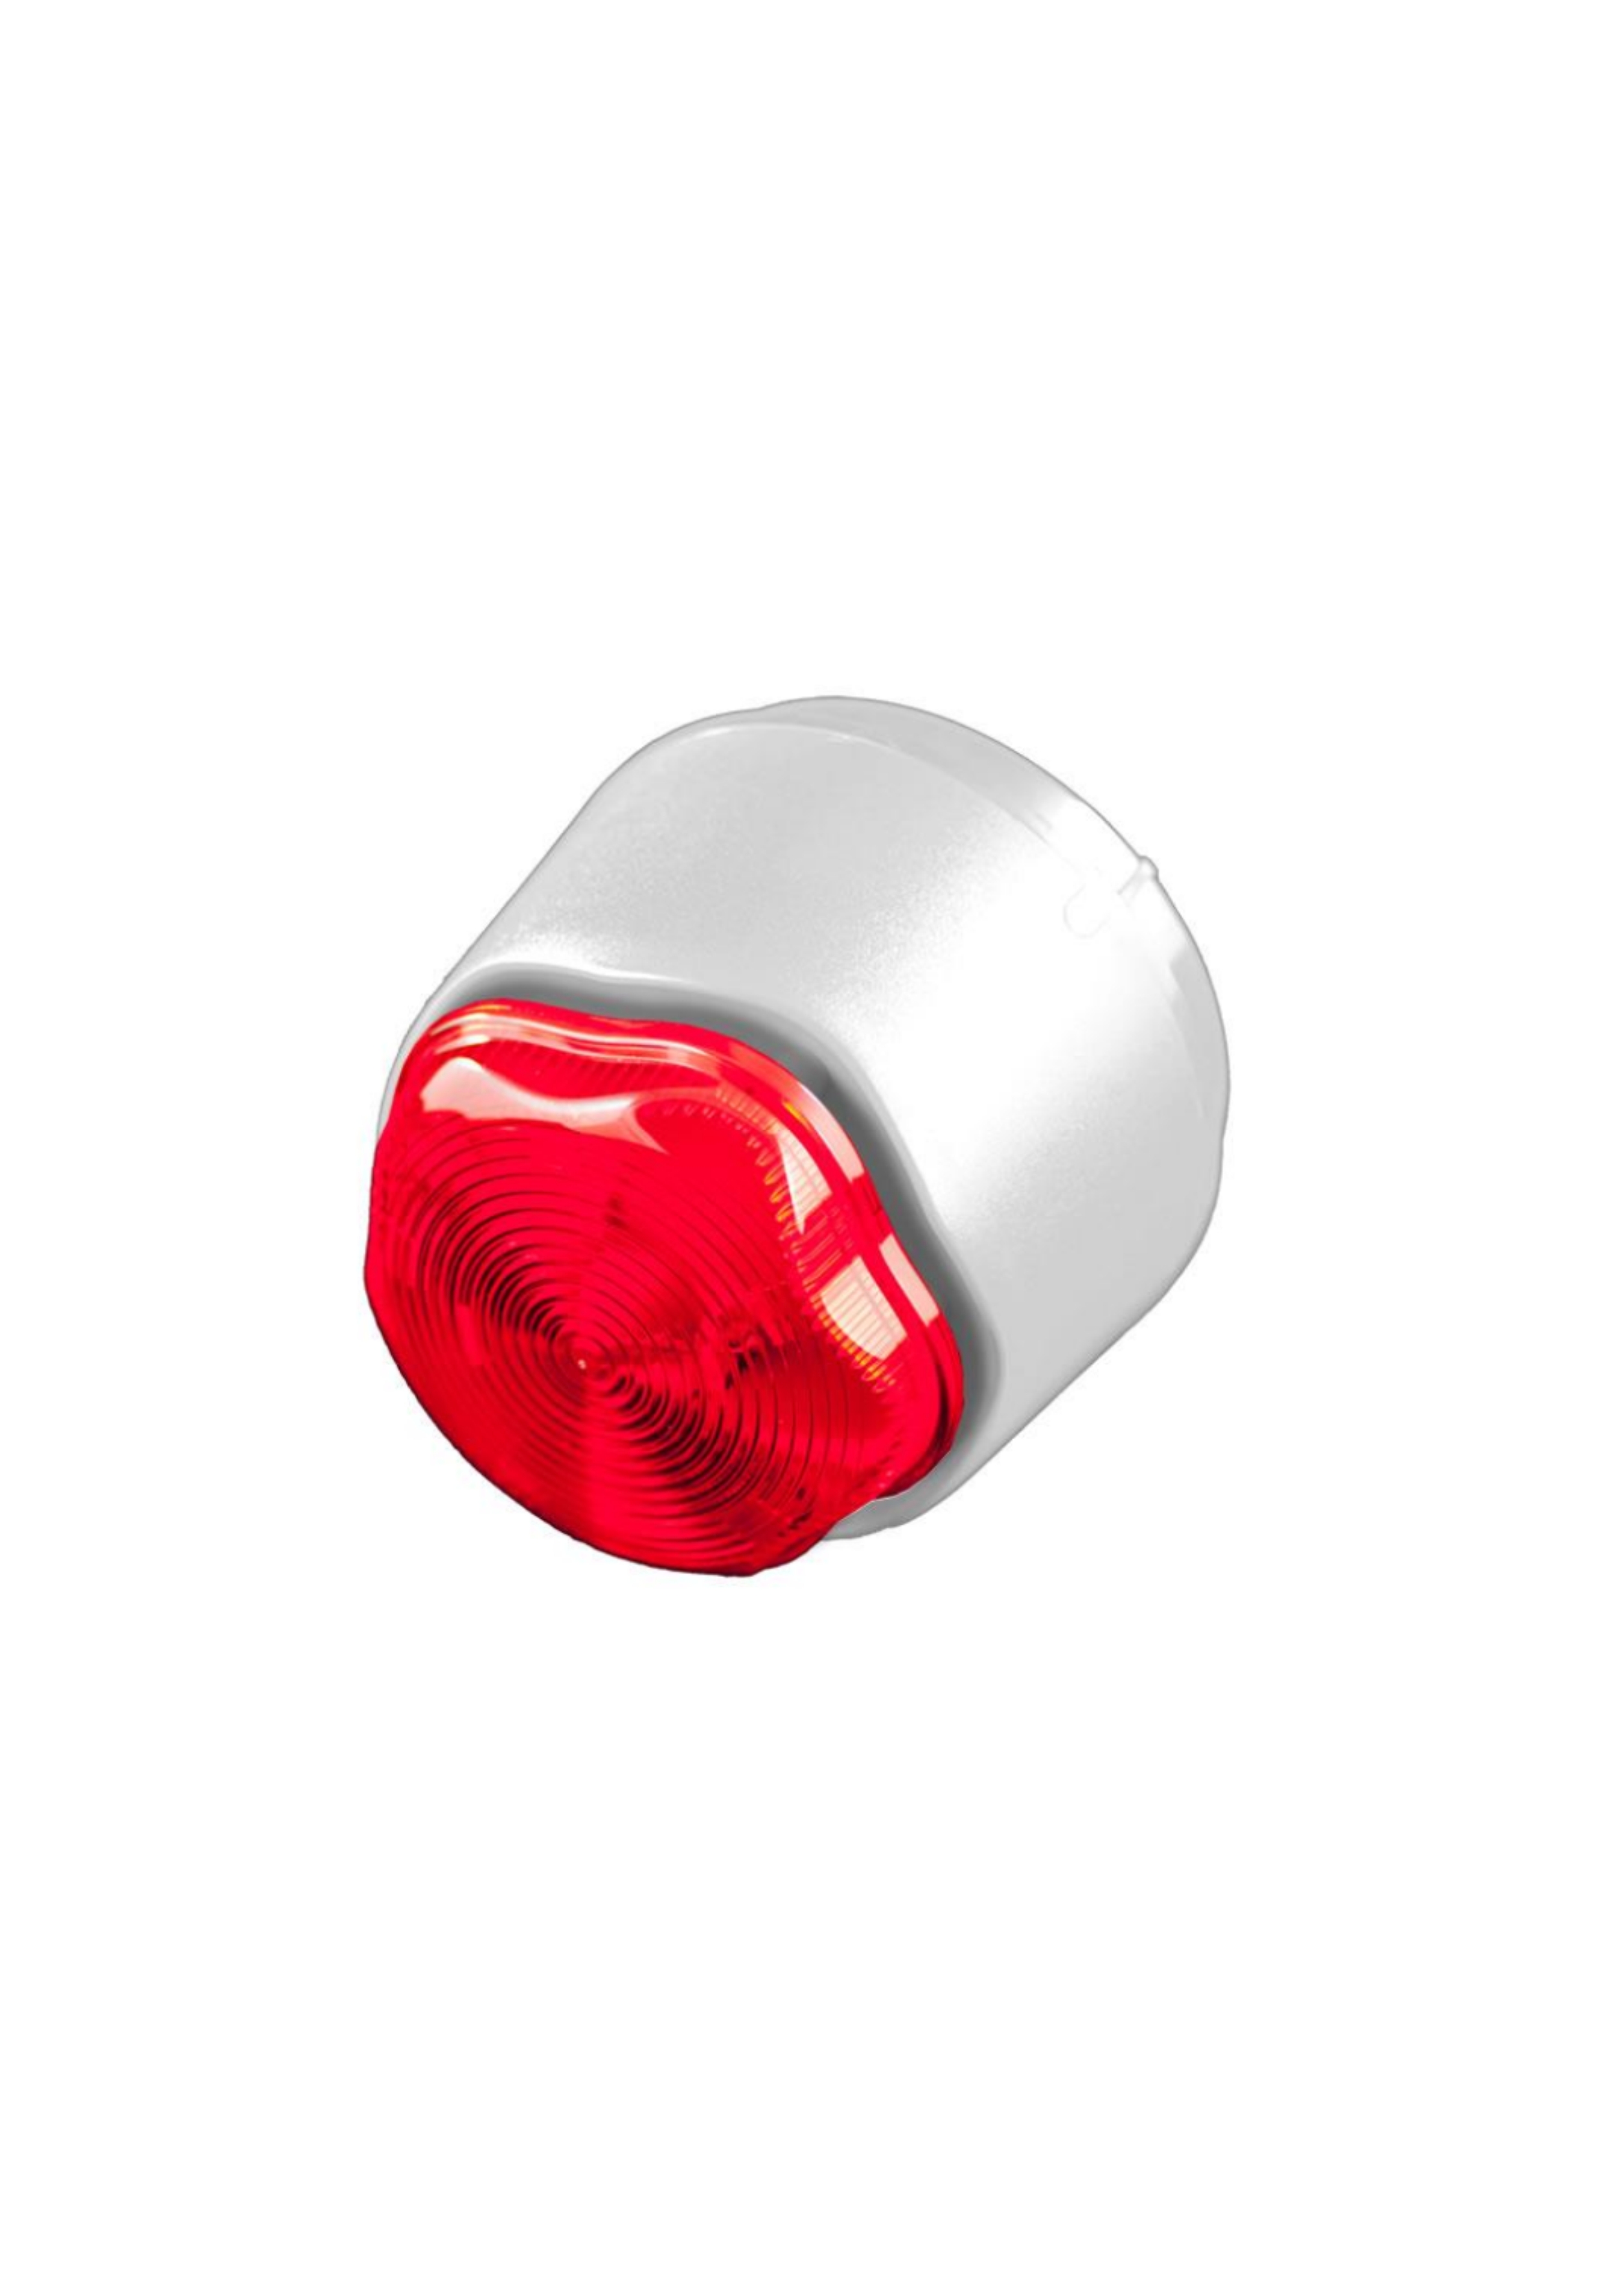 Conventional Wall Sounder-Beacon (white case, red ...